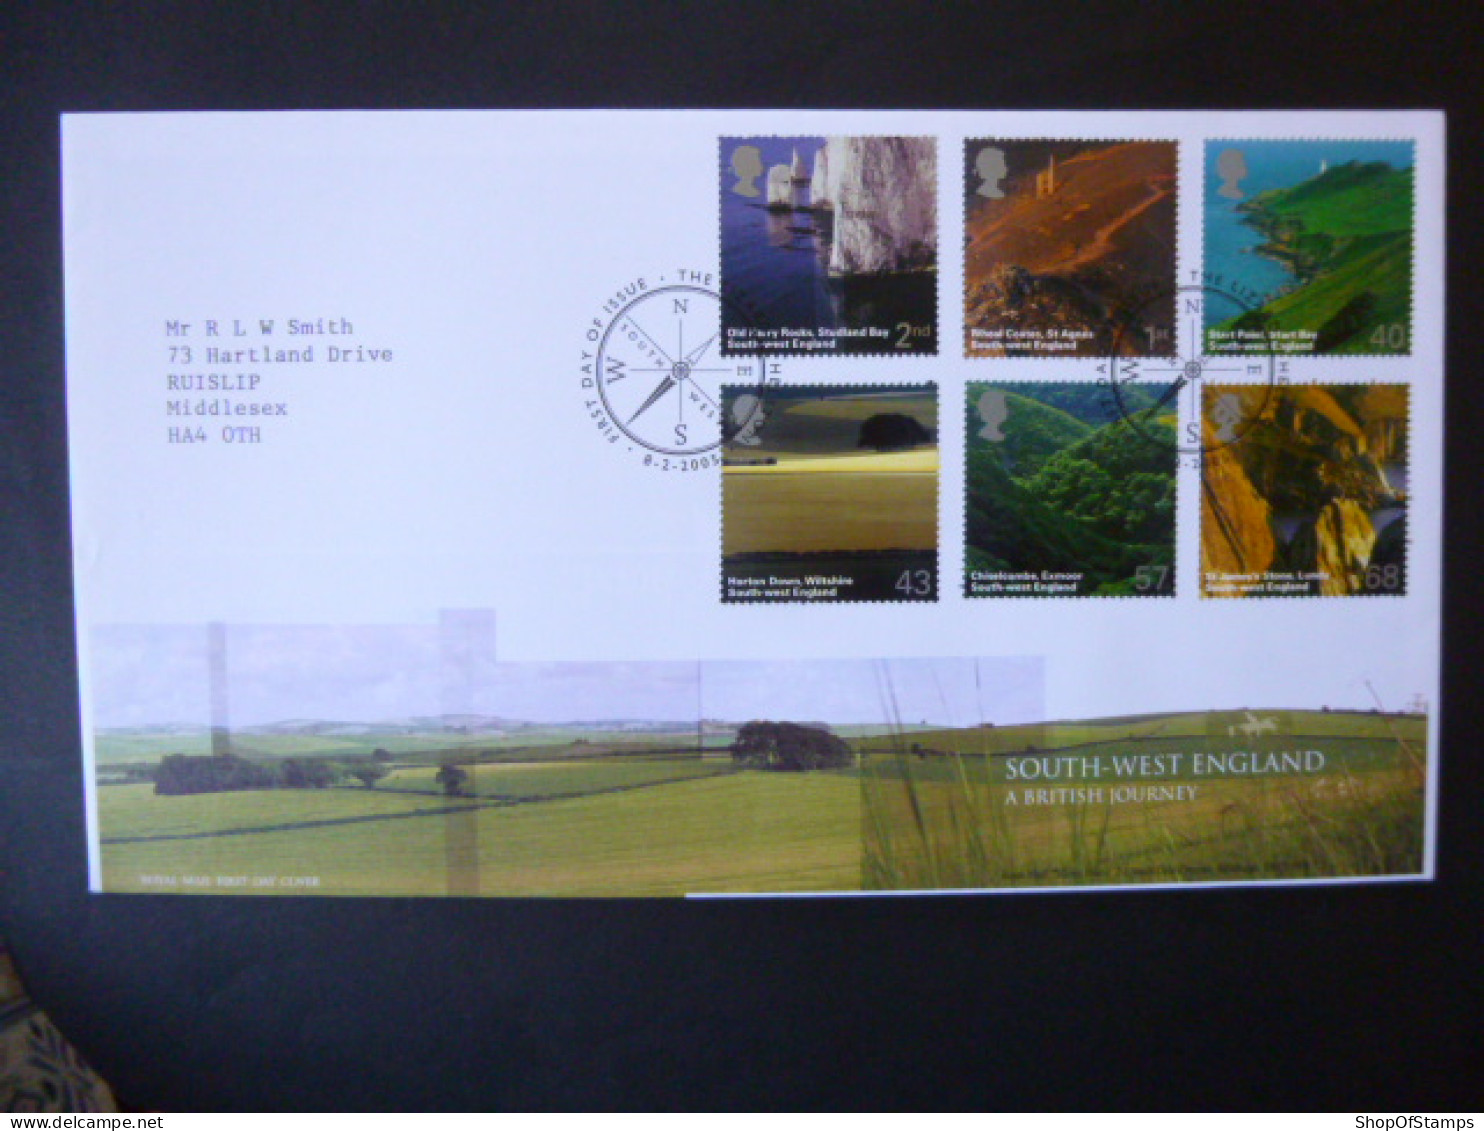 GREAT BRITAIN SG 2512-17 BRITISH JOURNEYS SOUTH WEST ENGLAND FDC THE LIZARD HELSTON - Unclassified